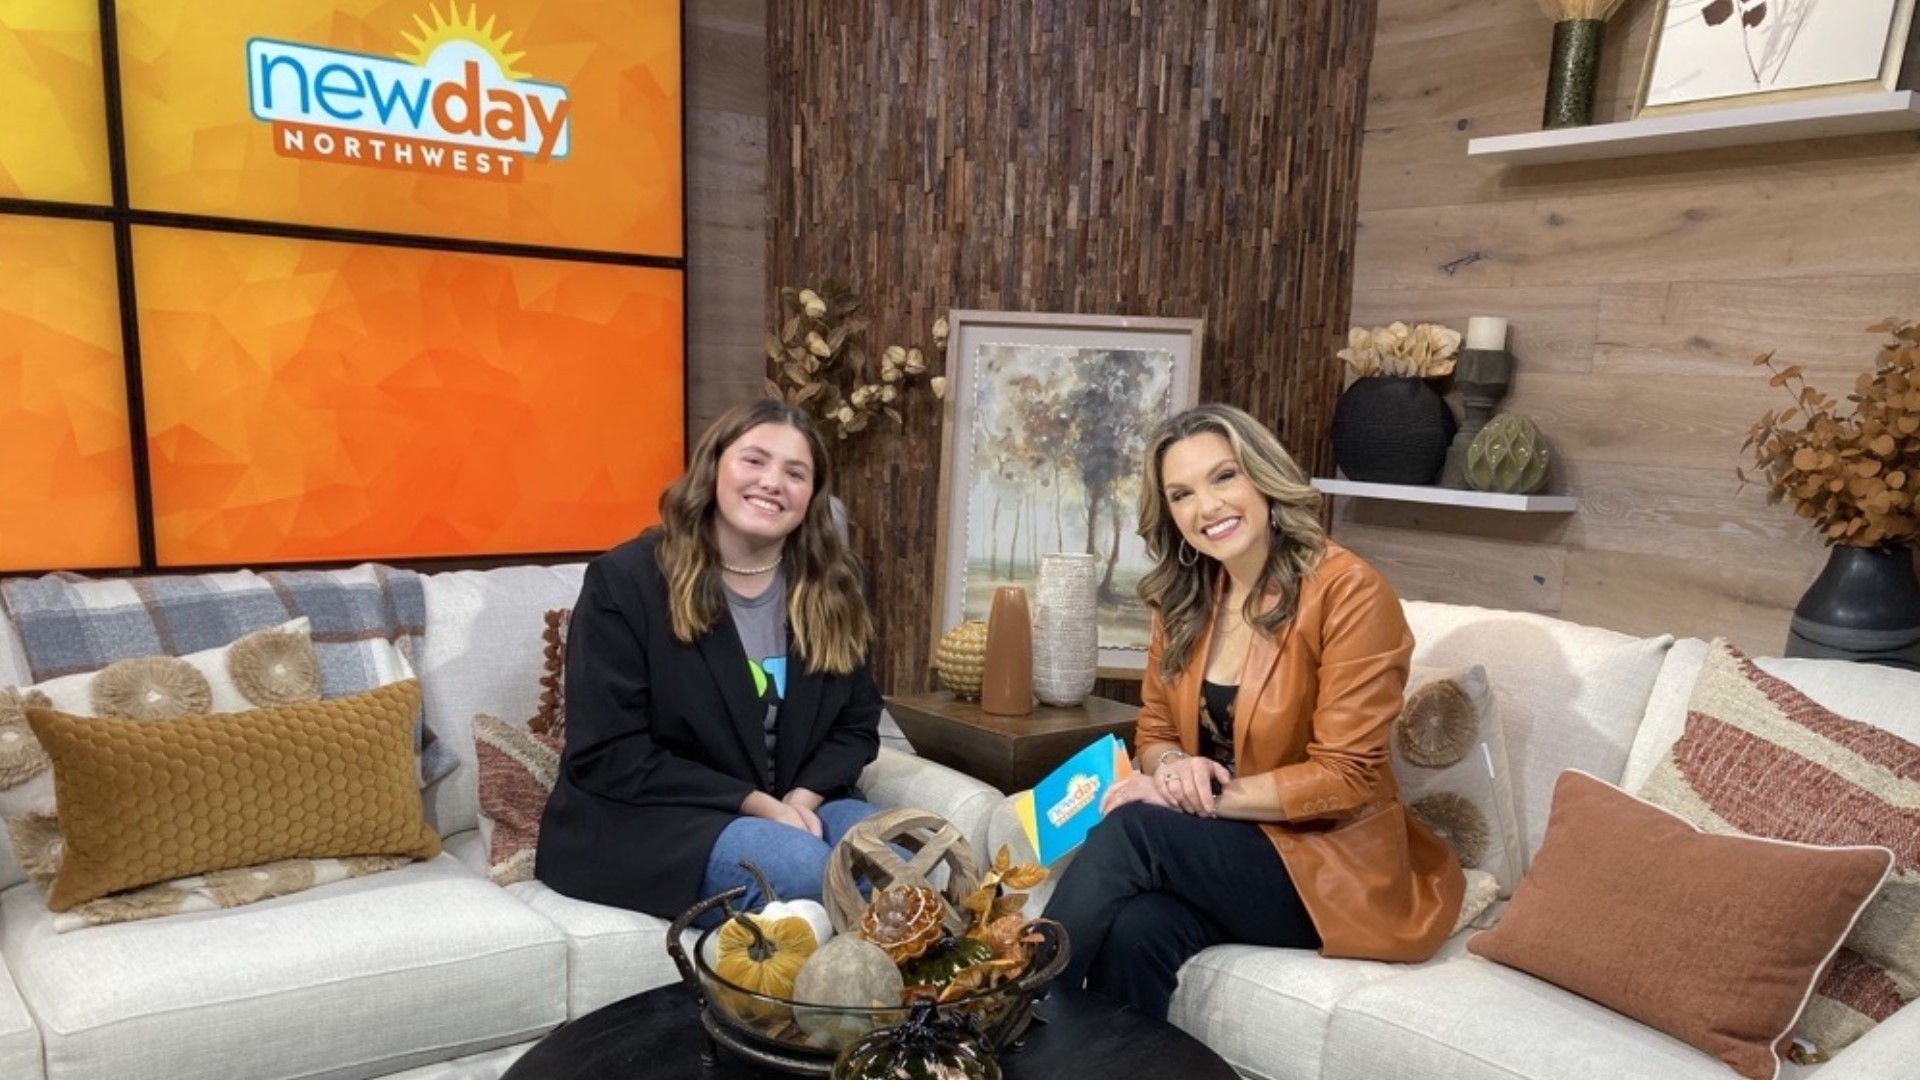 Olivia Vedder, the 18-year-old daughter of Pearl Jam’s Eddie Vedder, promotes voter registration and participation in democracy through the power of music #newdaynw